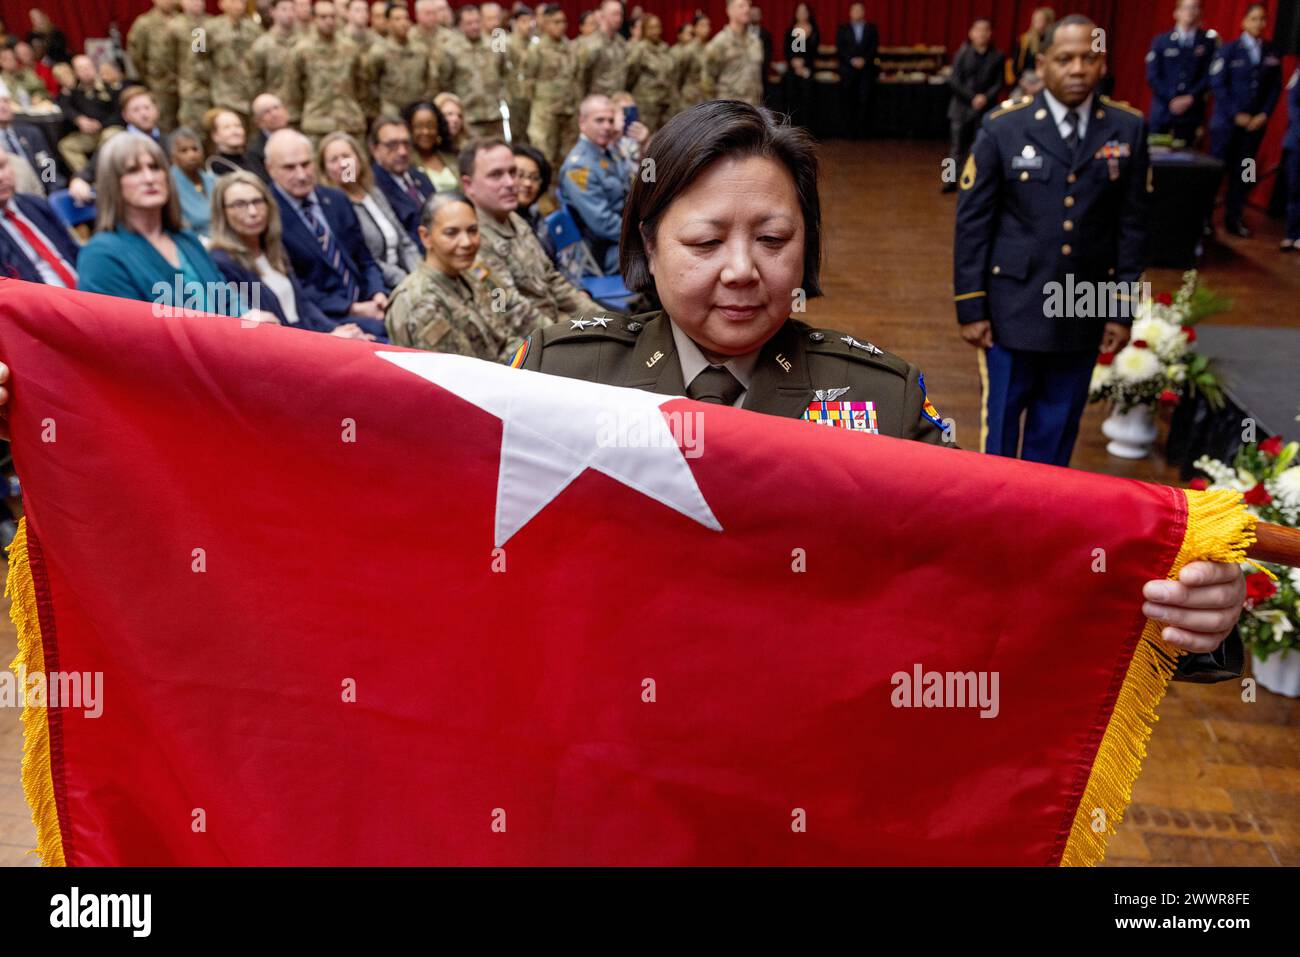 Maj. Gen. Lisa J. Hou, D.O., The Adjutant General of New Jersey, watches as her two-star general’s flag is unfurled during her promotion ceremony at National Guard Armory in Lawrenceville, New Jersey, Feb. 3, 2024. Hou, the 33rd Adjutant General of New Jersey, commands more than 8,400 Soldiers and Airmen of the New Jersey National Guard. As Commissioner of the New Jersey Department of Military and Veterans Affairs, Hou leads, directs, and manages the New Jersey Department of Military and Veterans Affairs in the execution of federal and state missions. In addition, she manages all state veteran Stock Photo